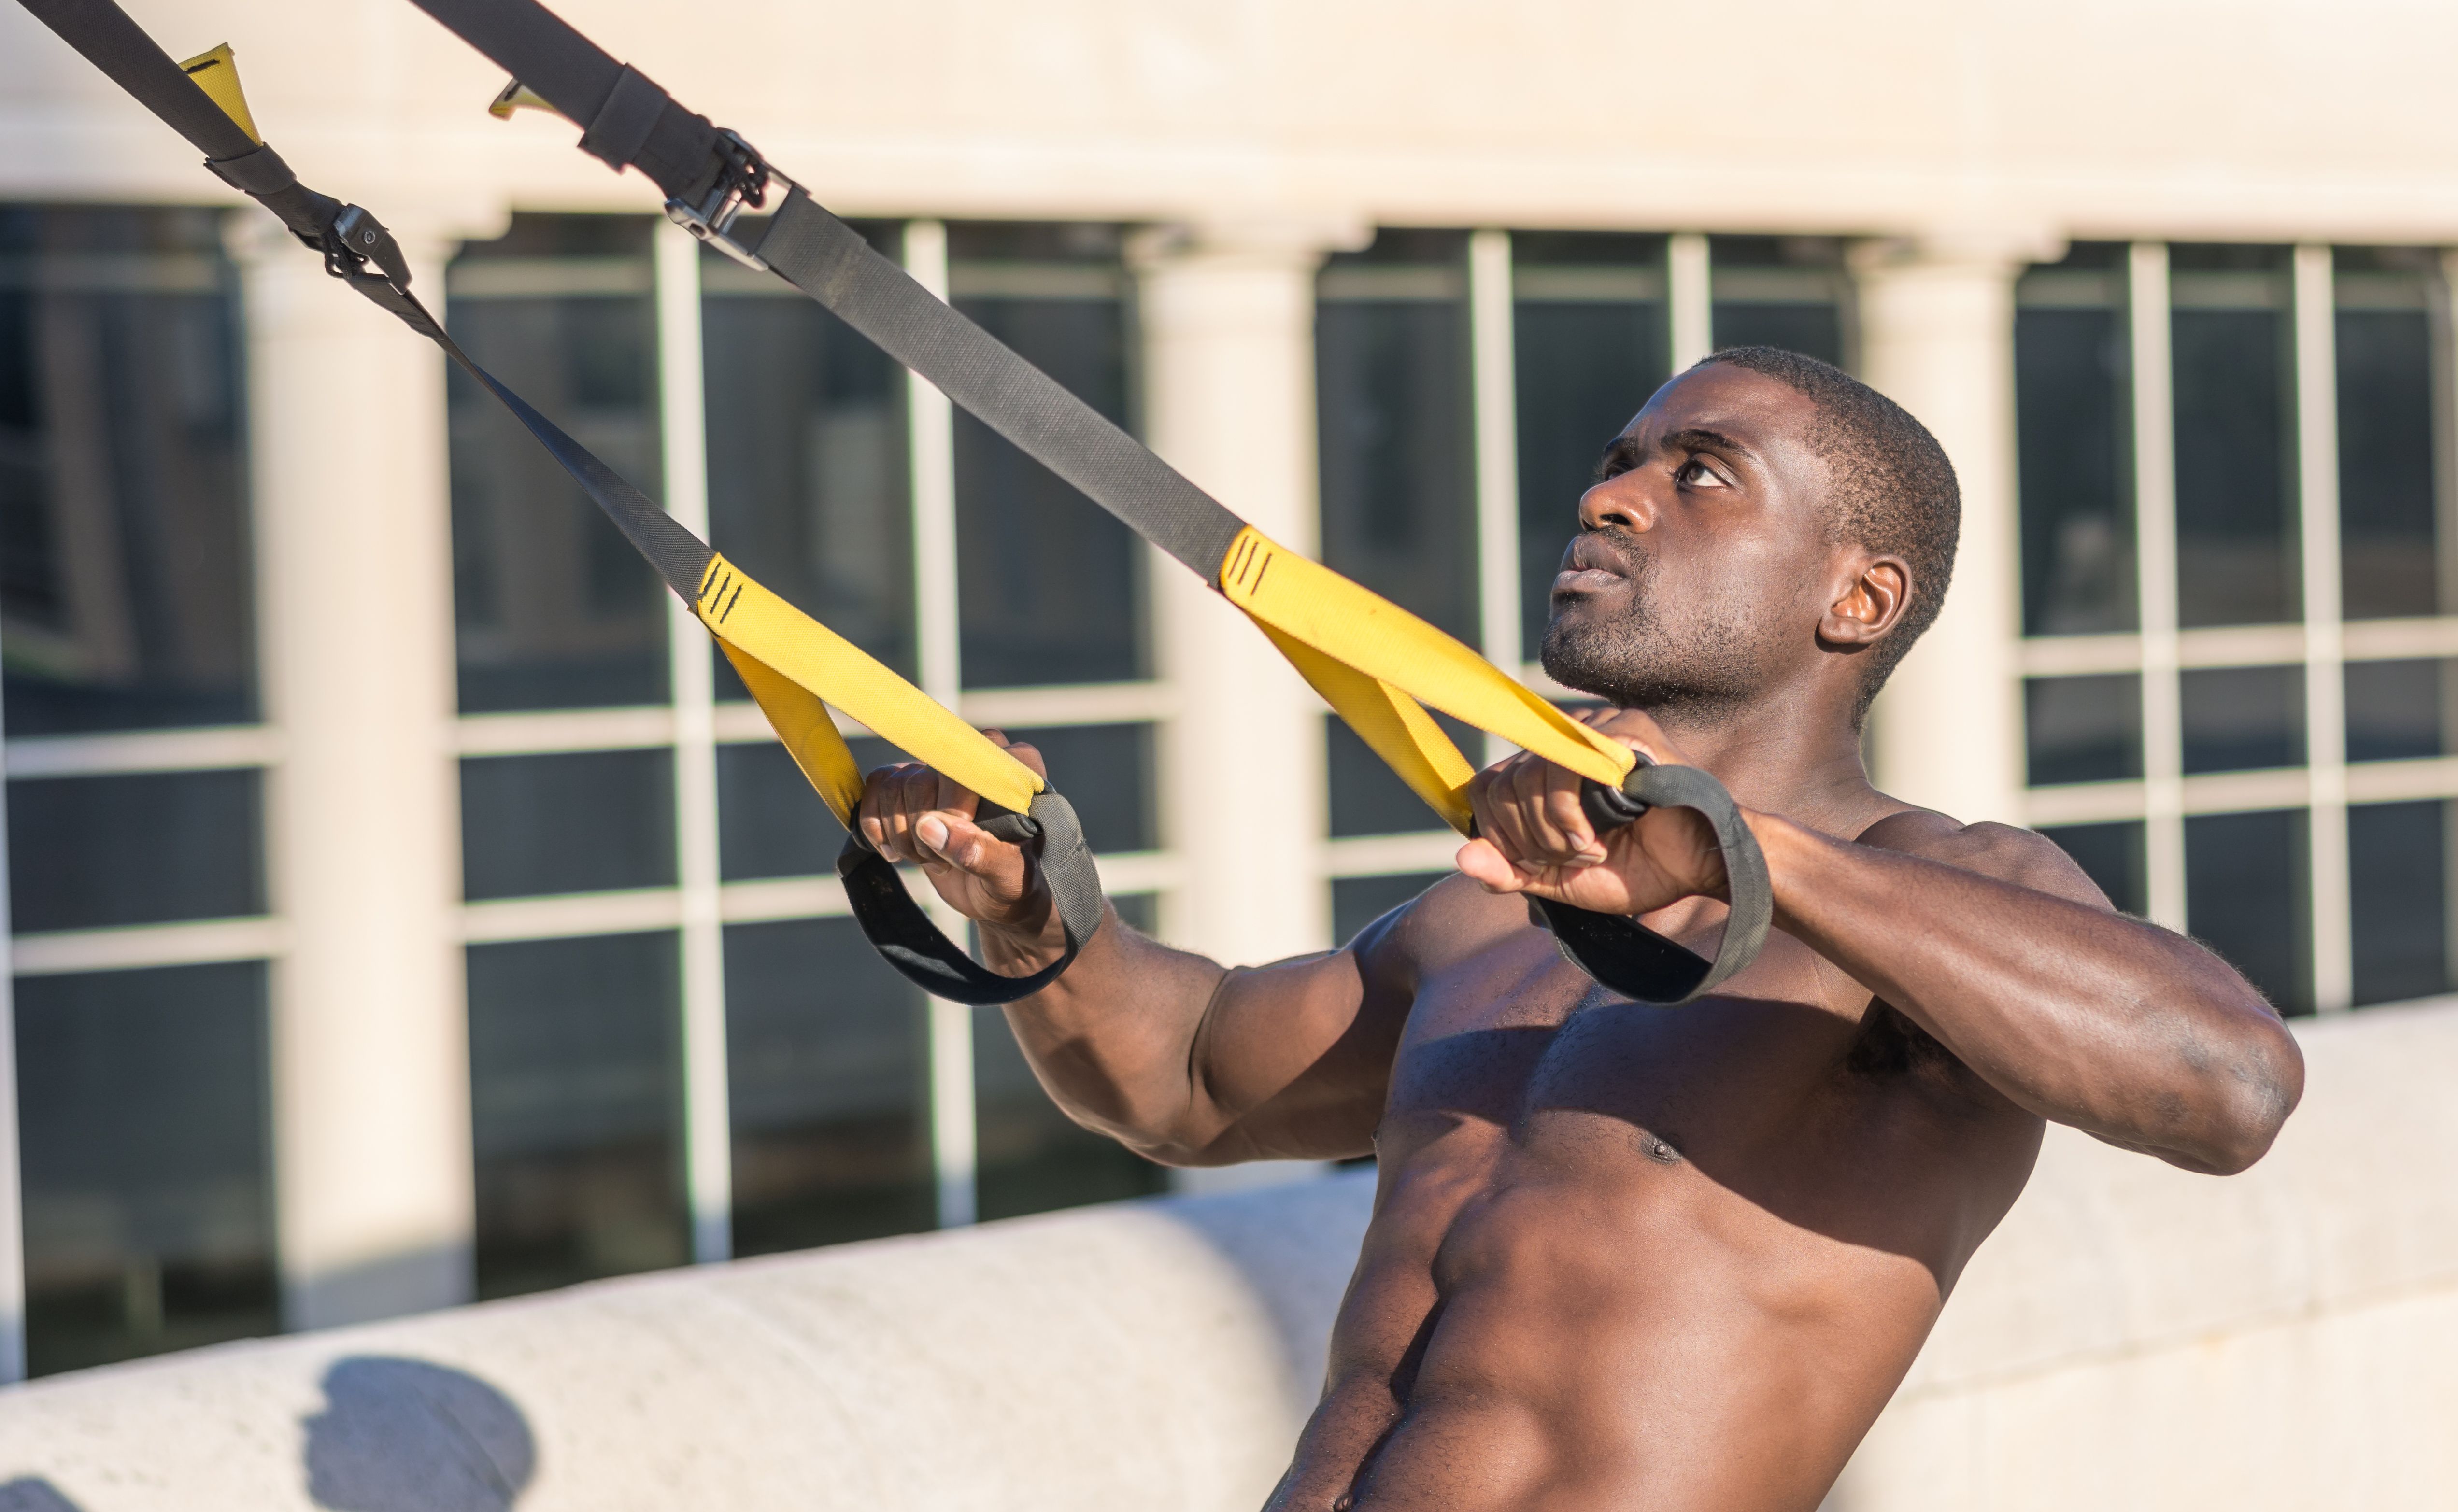 Young man using a TRX system outdoor.